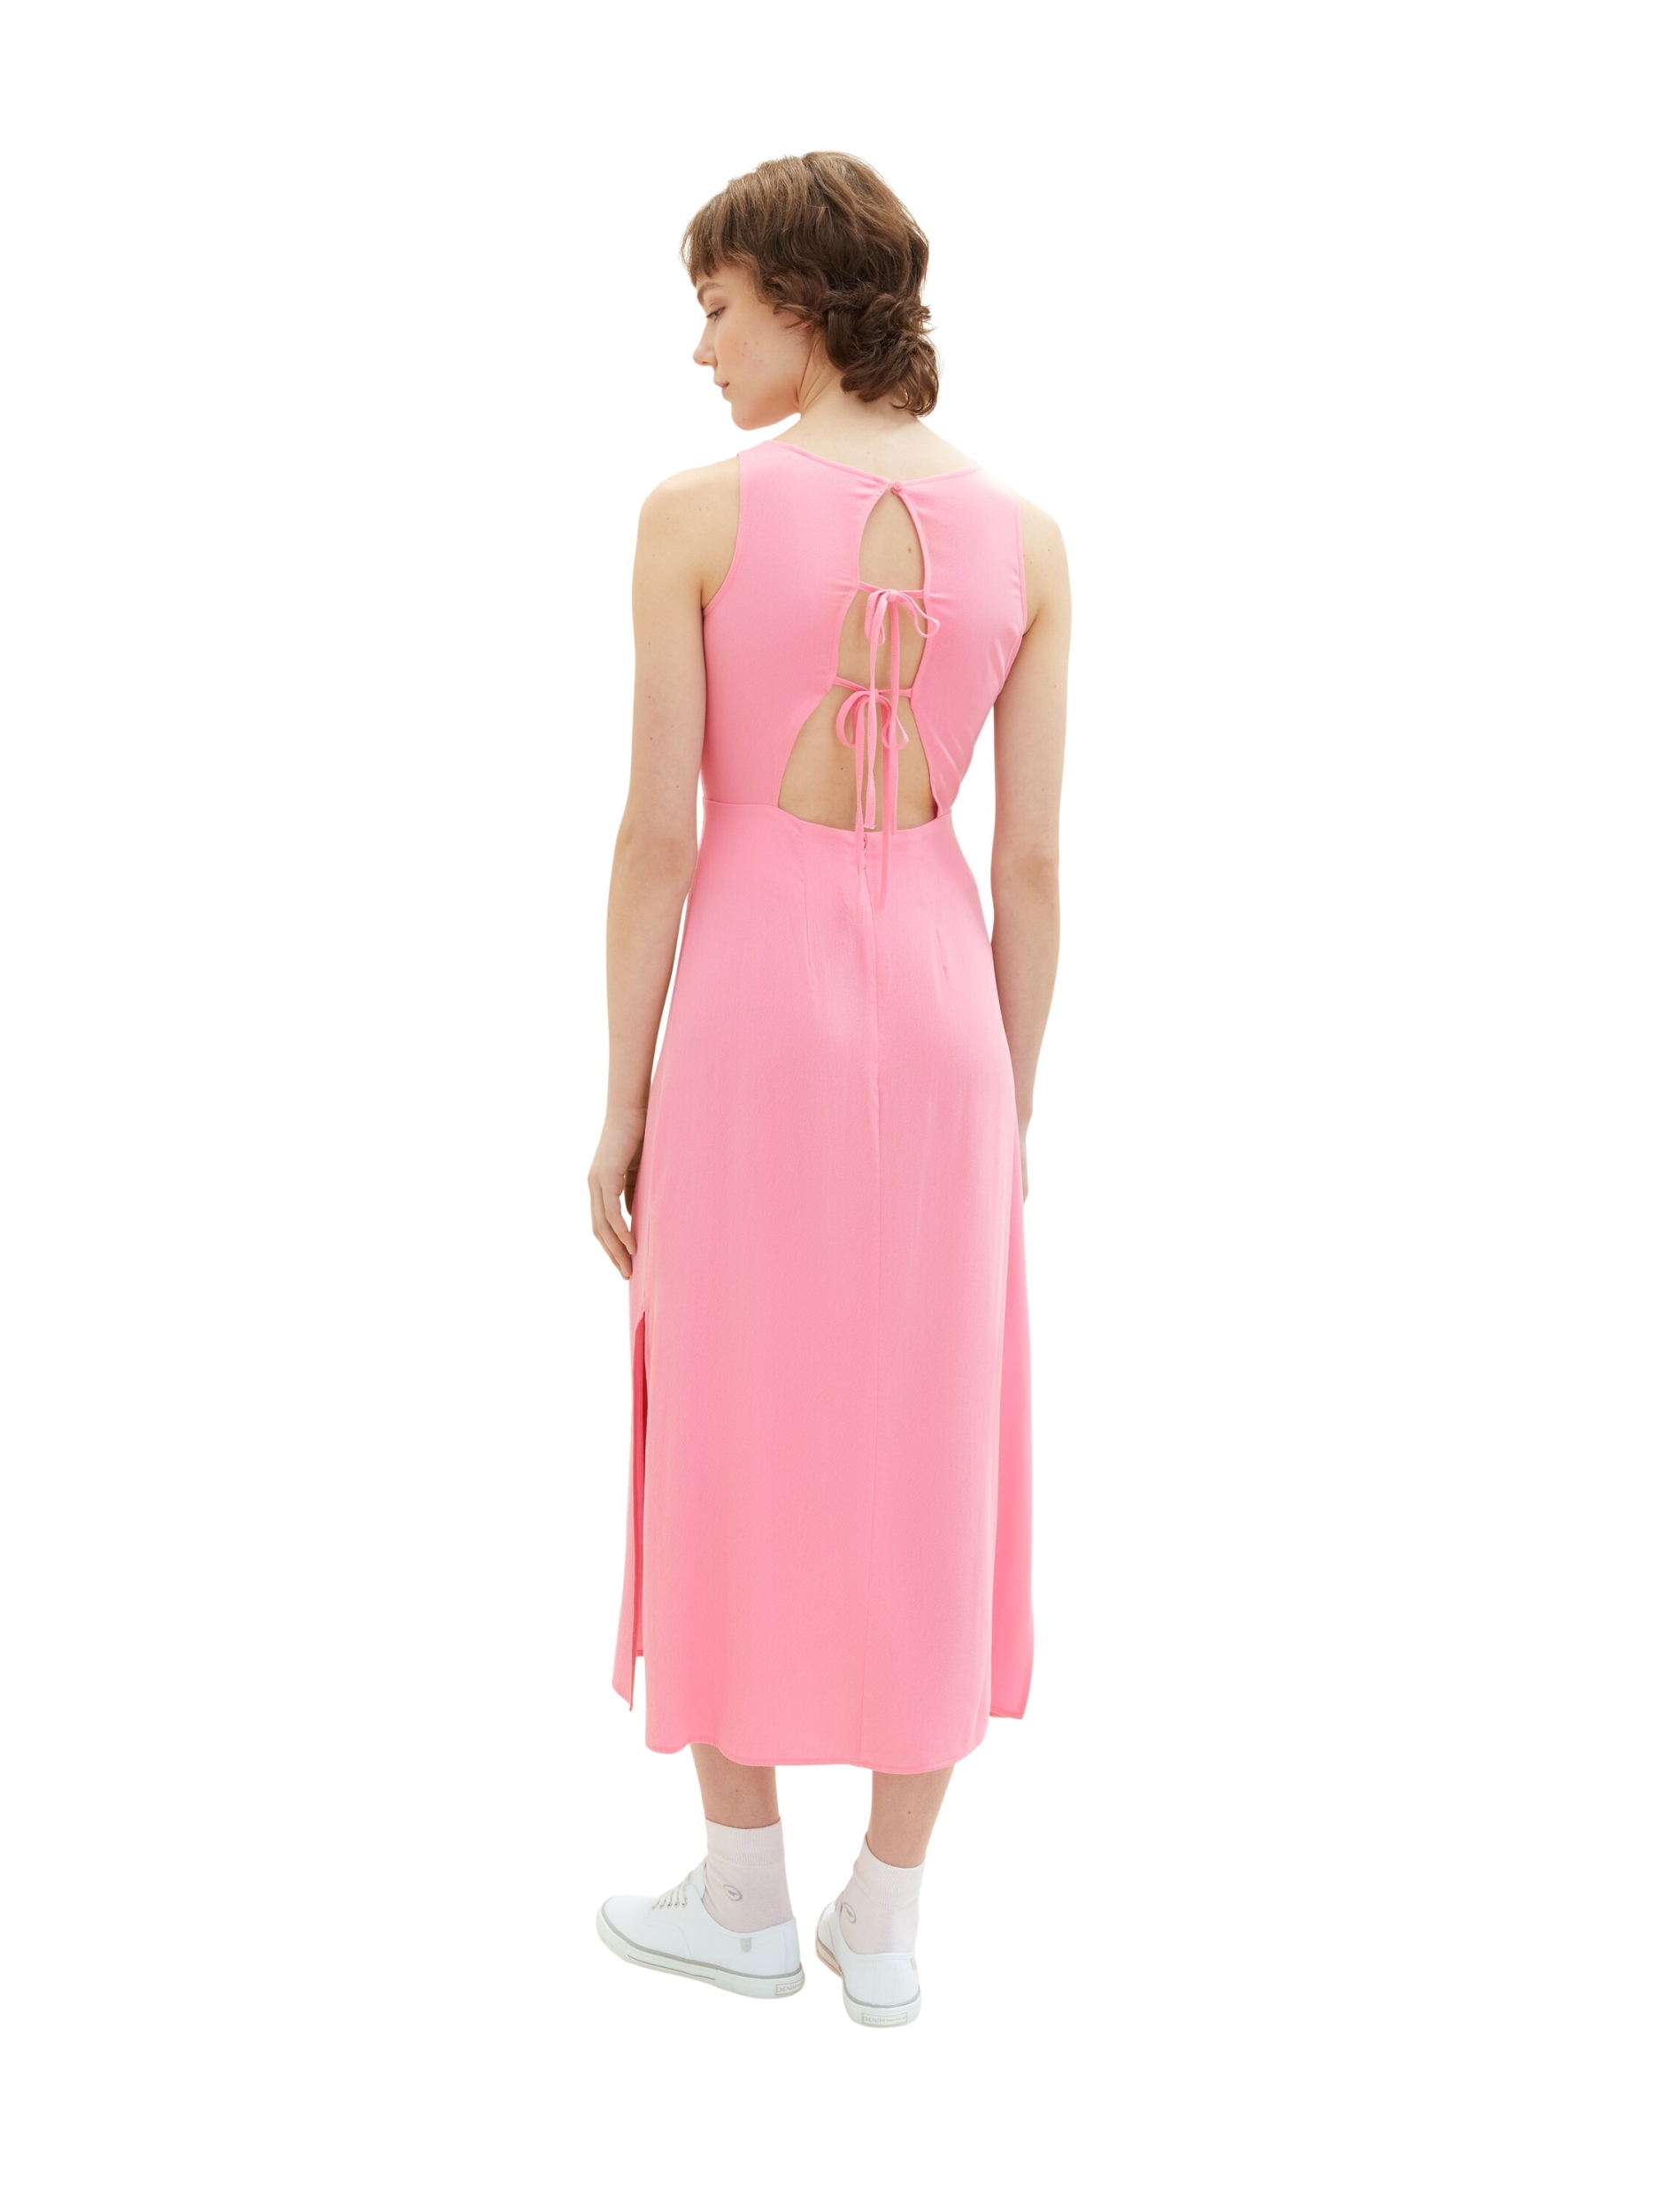 dress with back detail